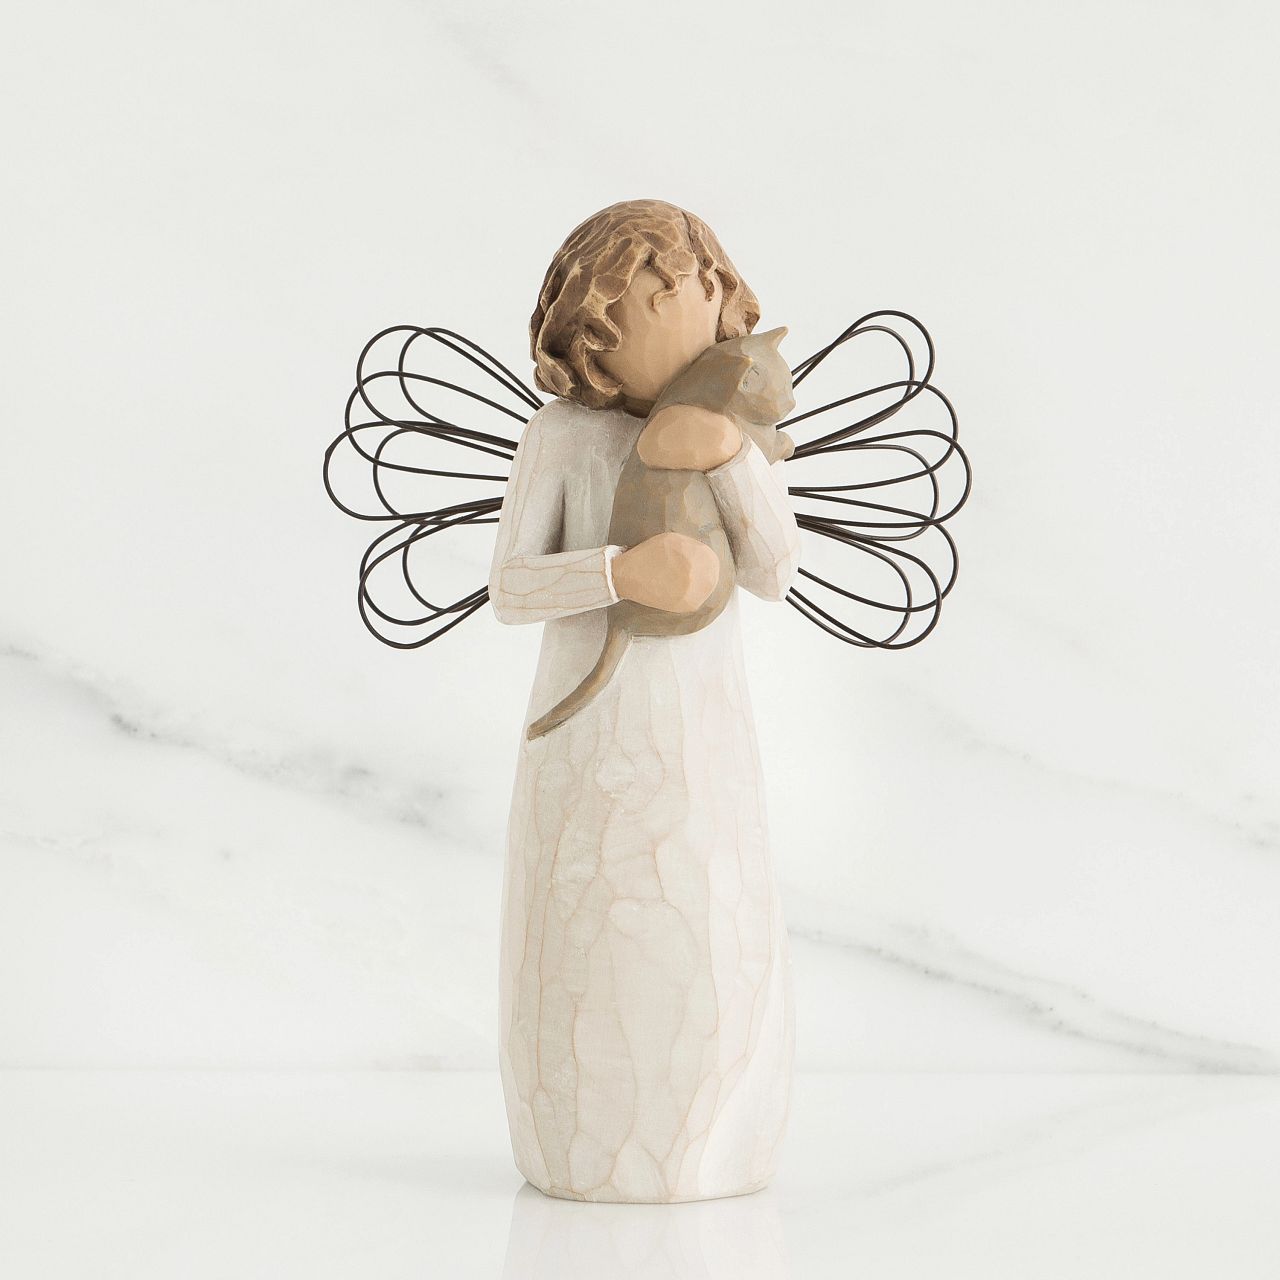 With Affection by Willow Tree  Willow Tree is an intimate line of figurative sculptures representing sentiments of love, closeness, healing, courage, hope...all the emotions we encounter in life. Artist Susan Lordi hand carves the original of each Willow Tree sculpture.